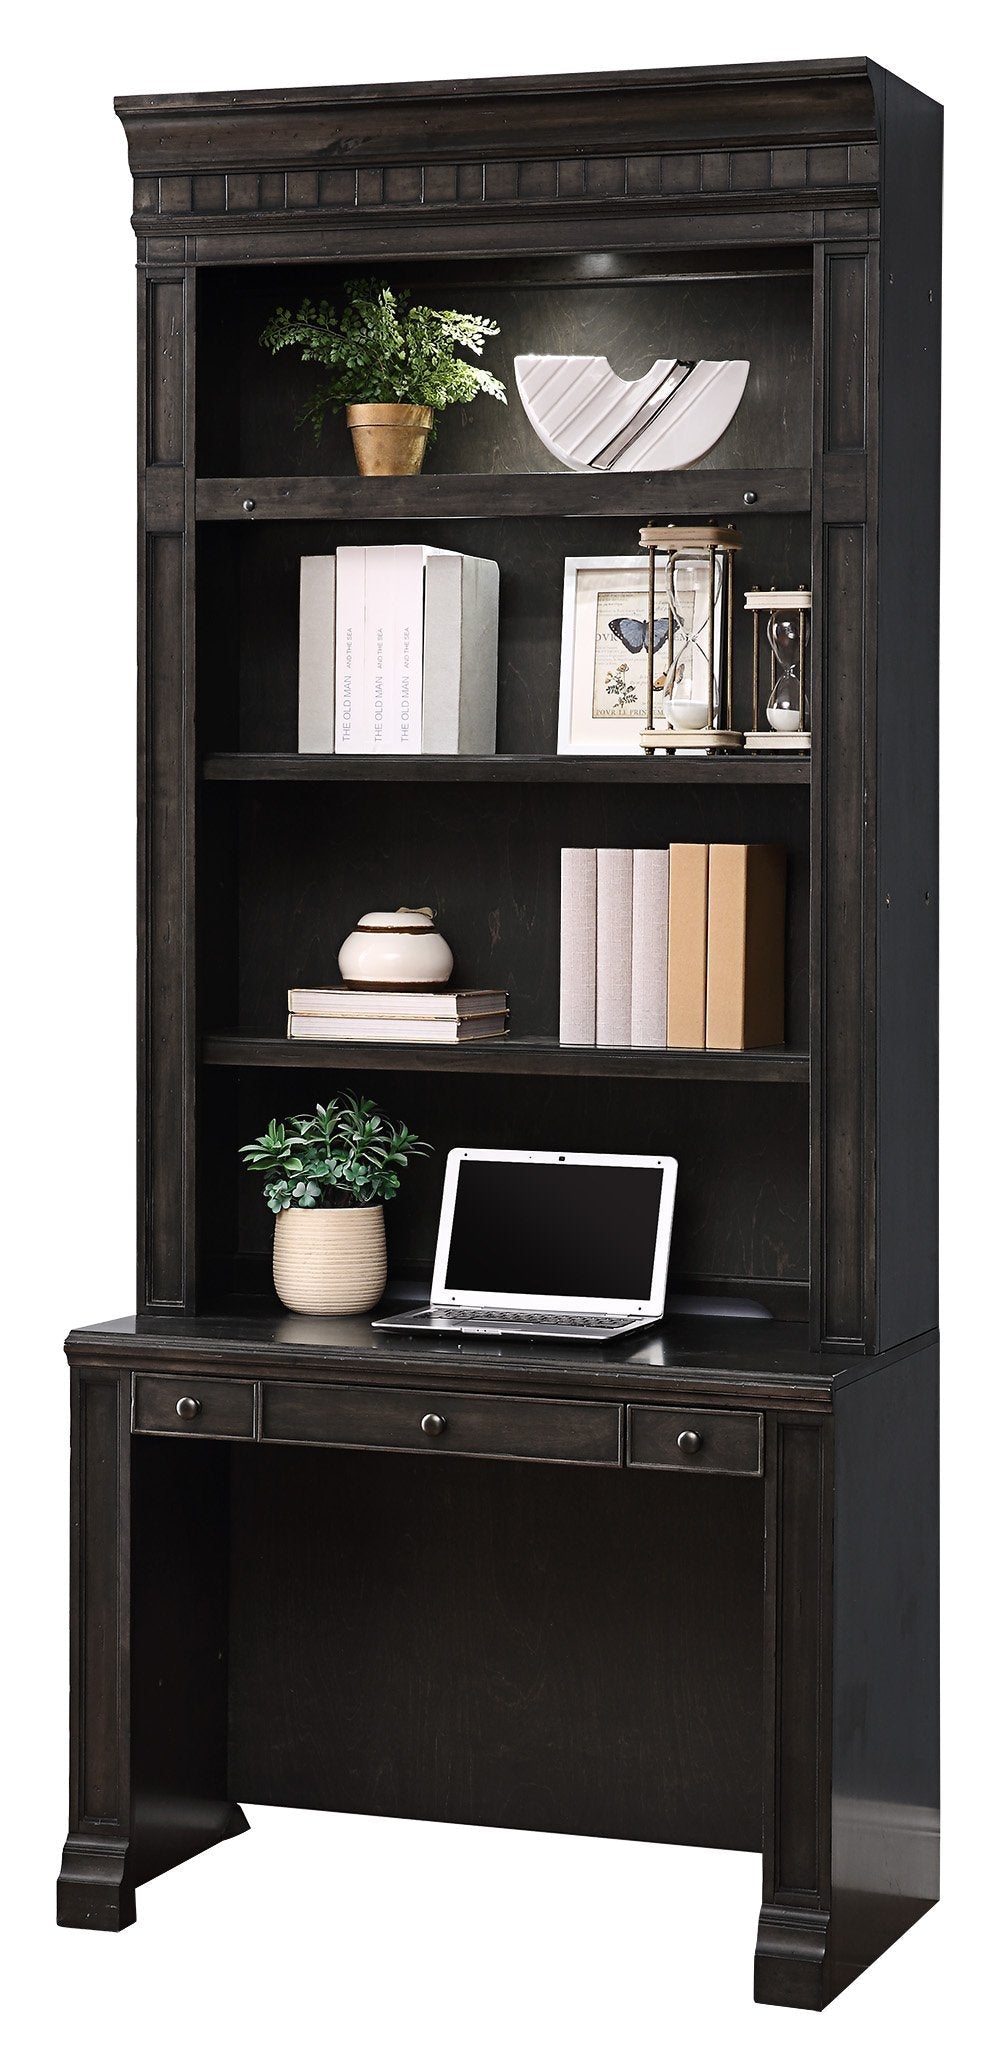 WASHINGTON HEIGHTS IN-WALL LIBRARY DESK AND HUTCH